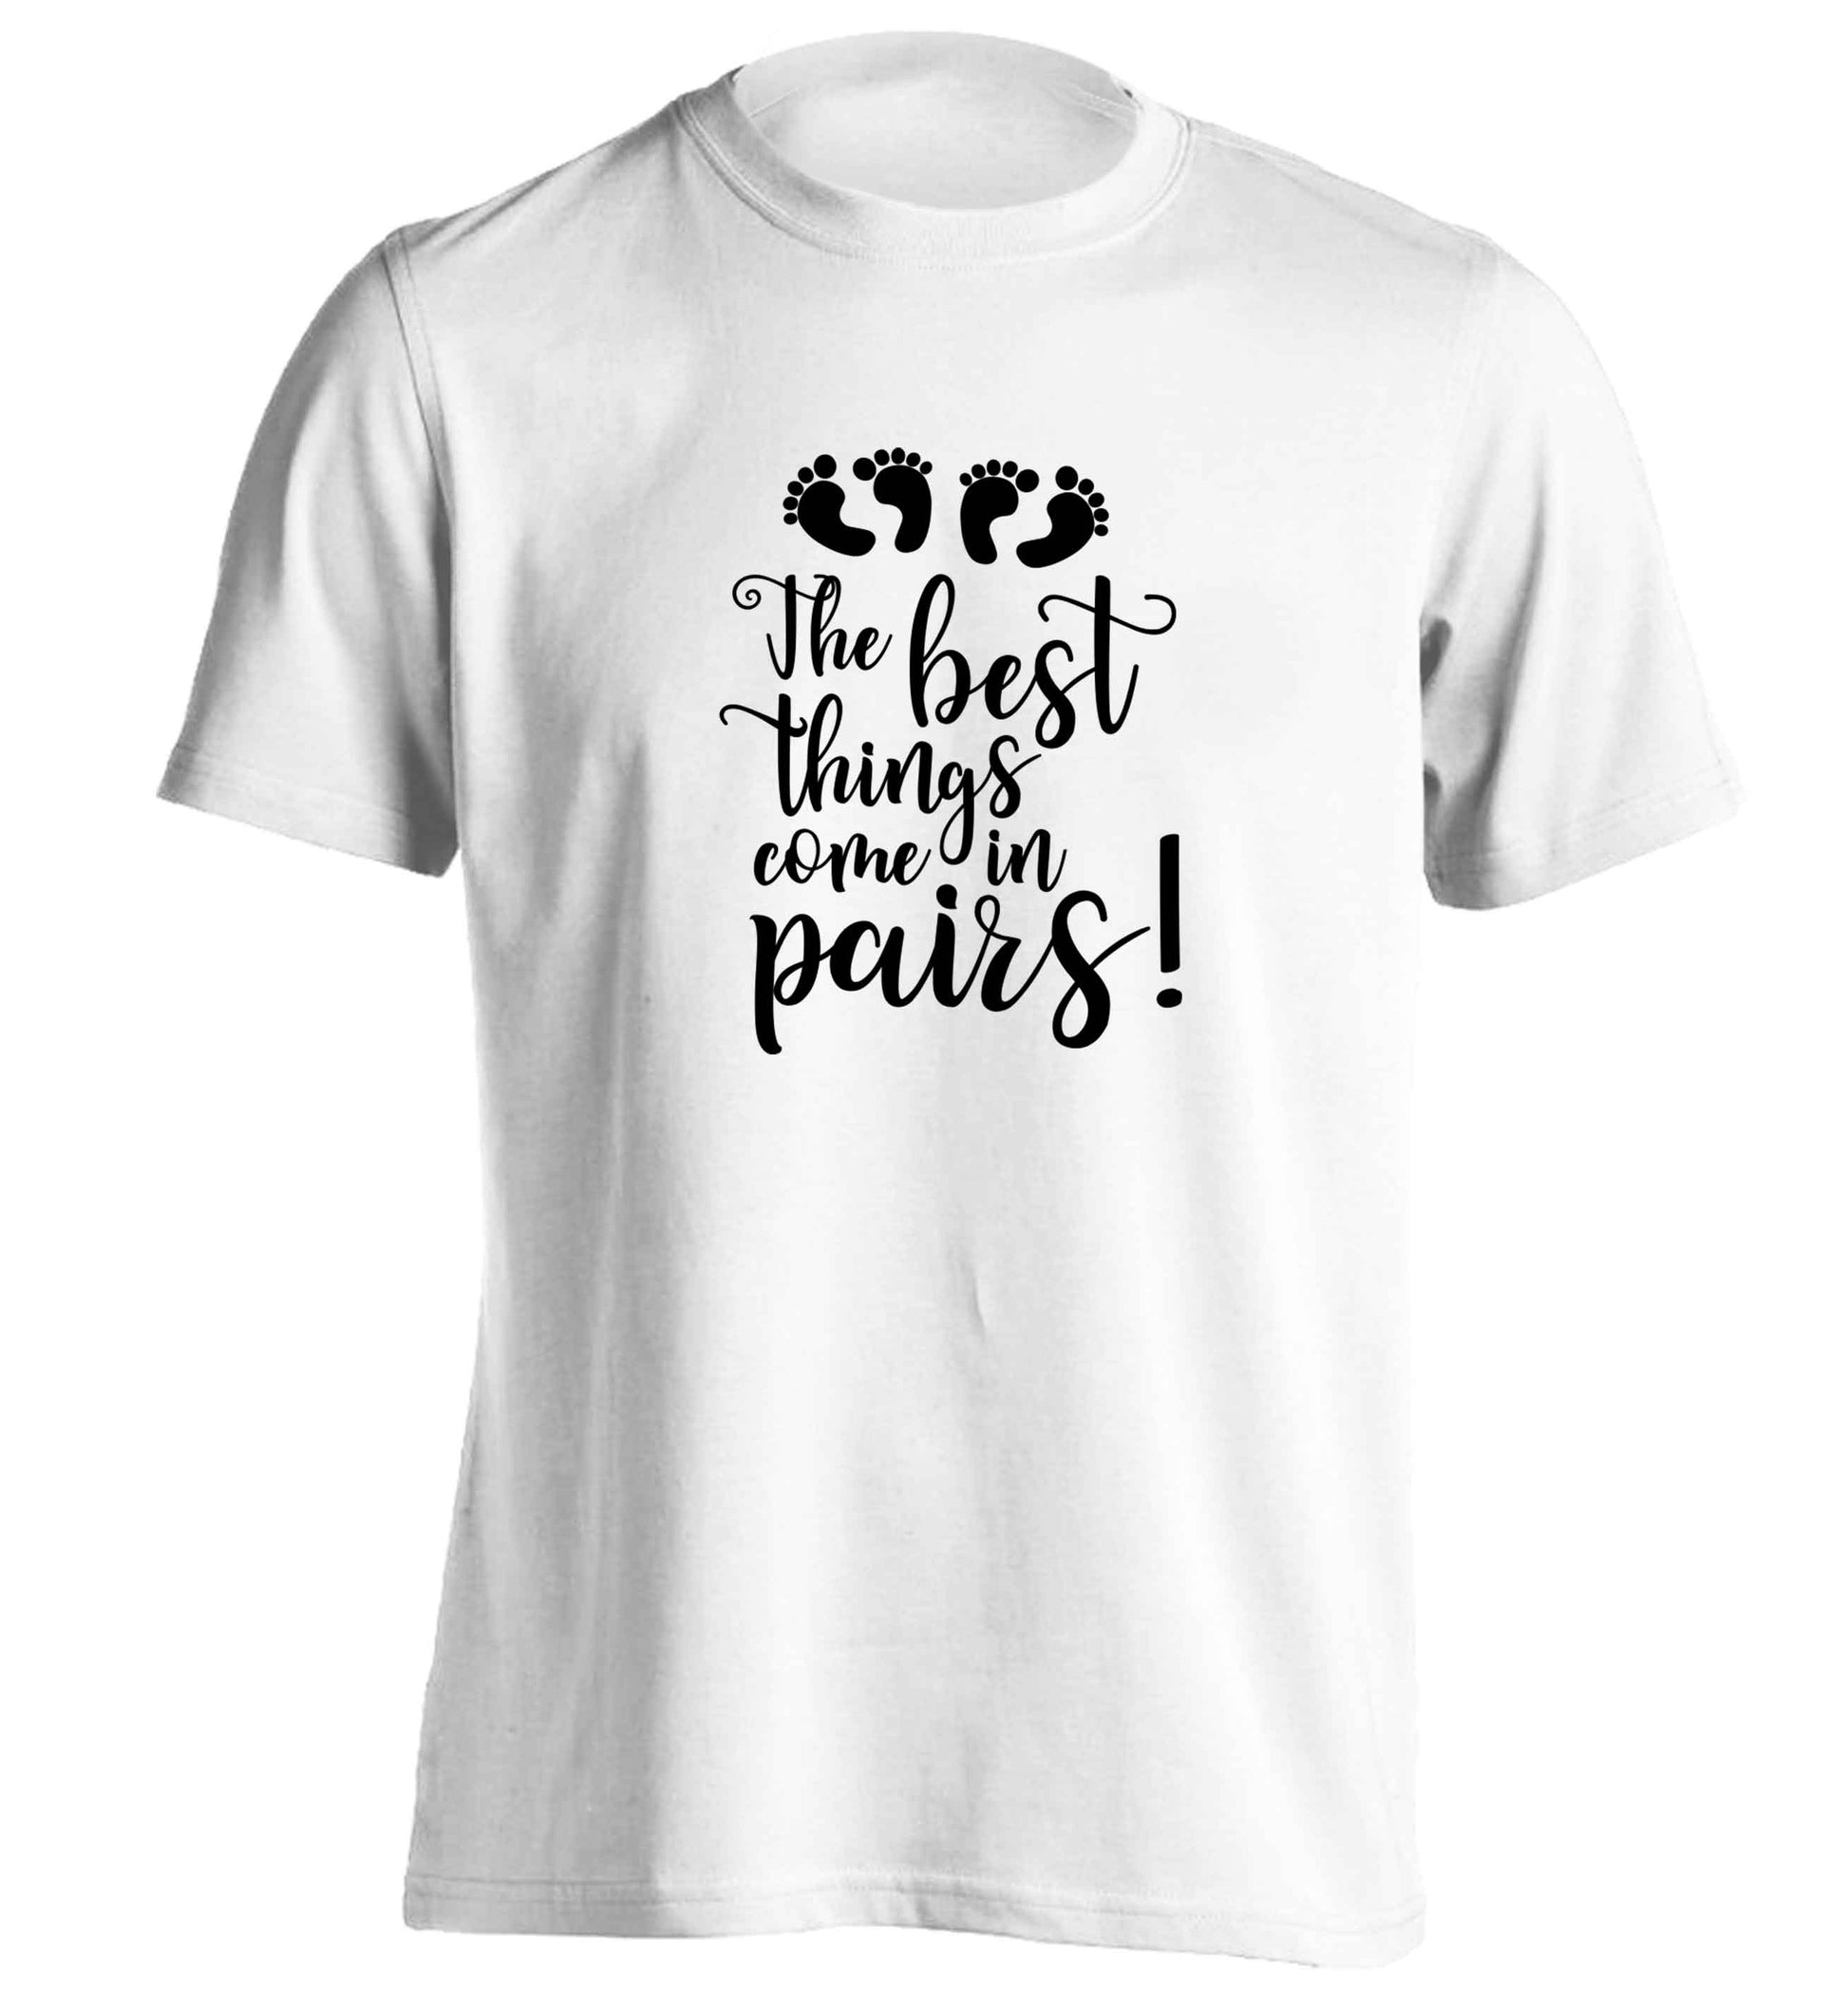 The best things come in pairs! adults unisex white Tshirt 2XL